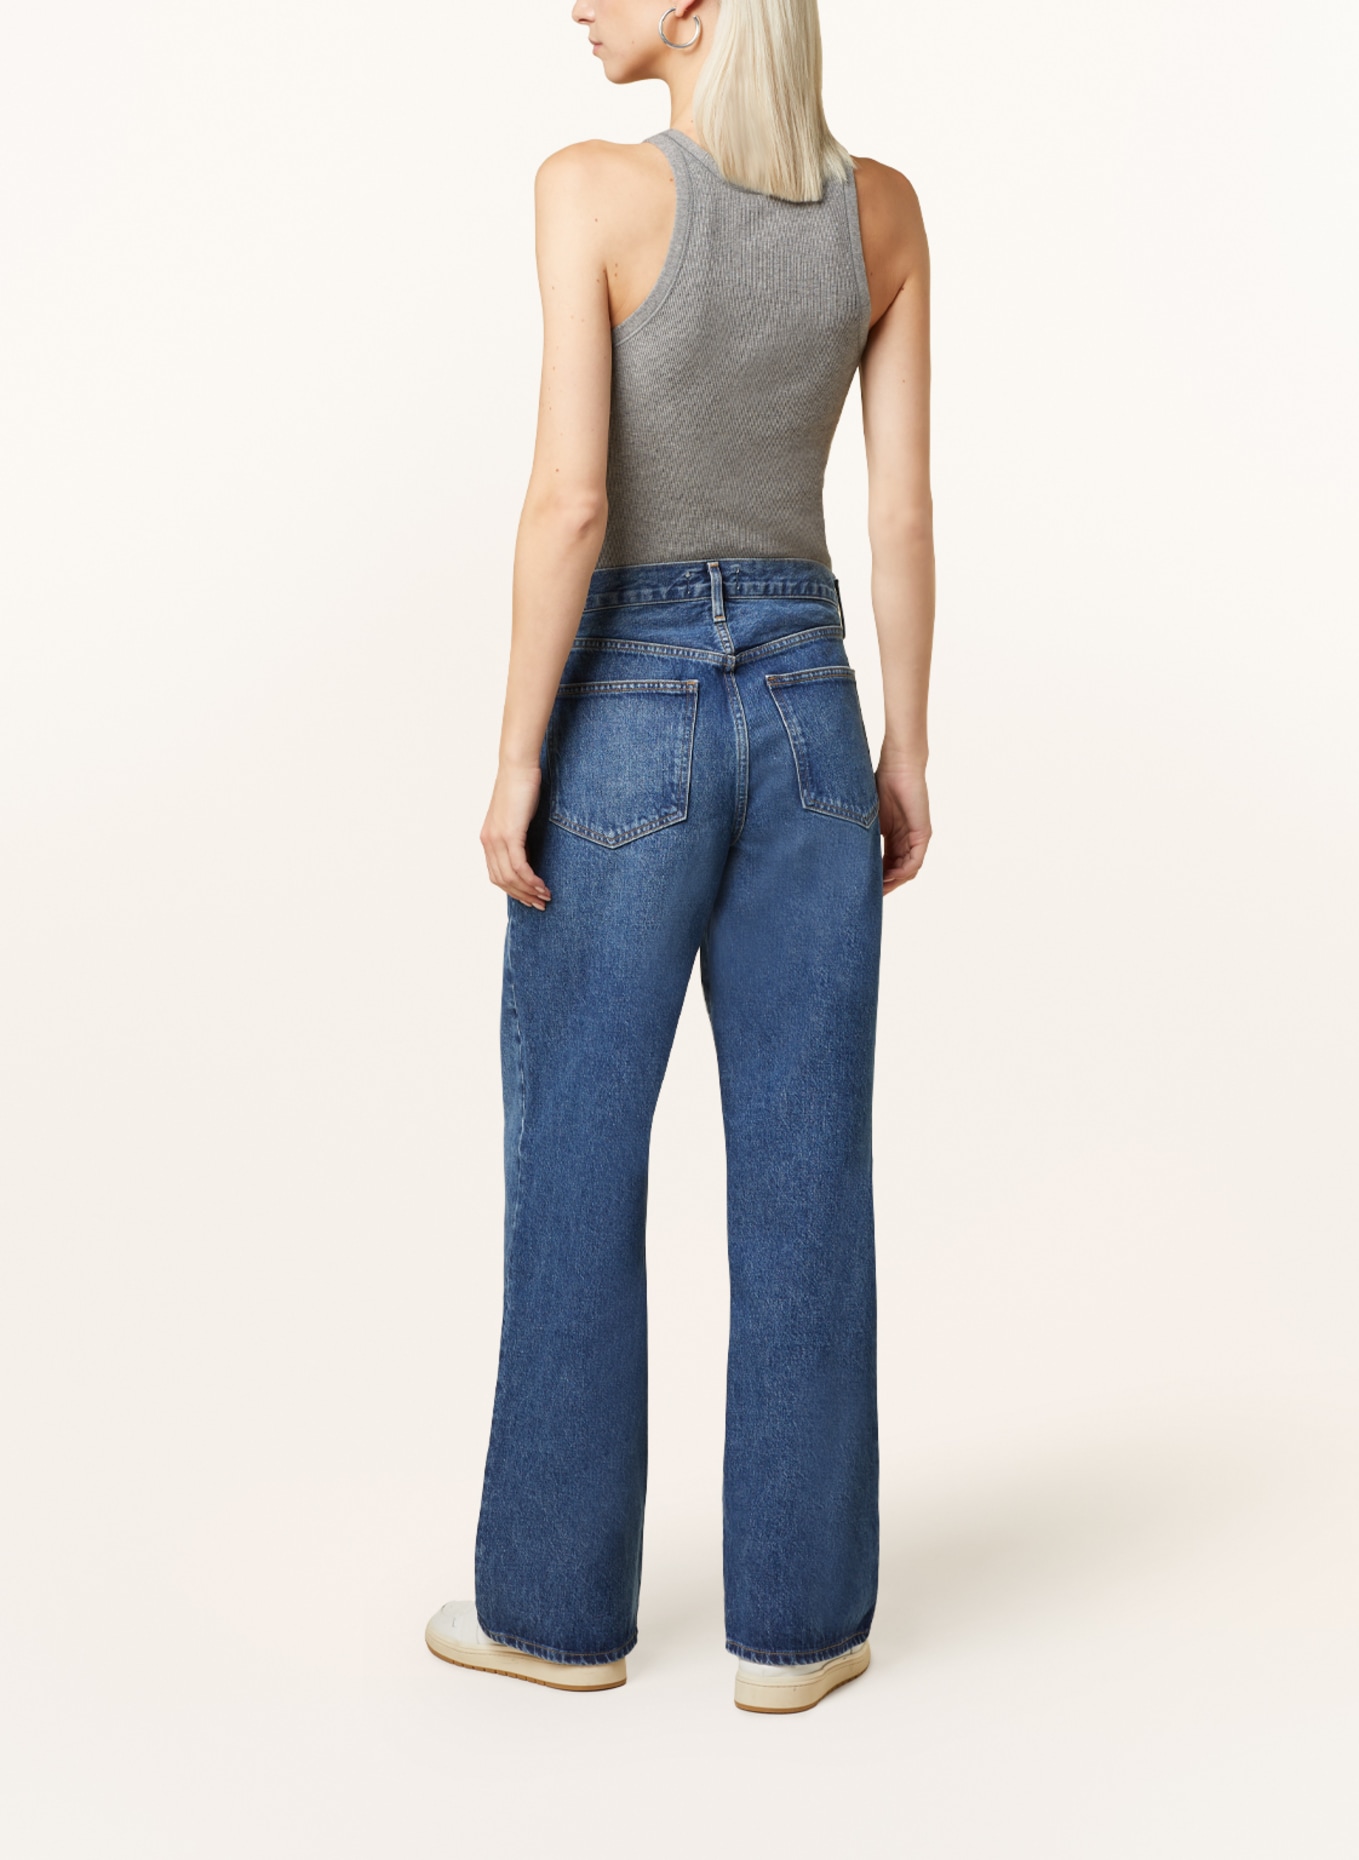 AGOLDE Jeans FUSION JEAN, Farbe: ambition dk ind (Bild 3)